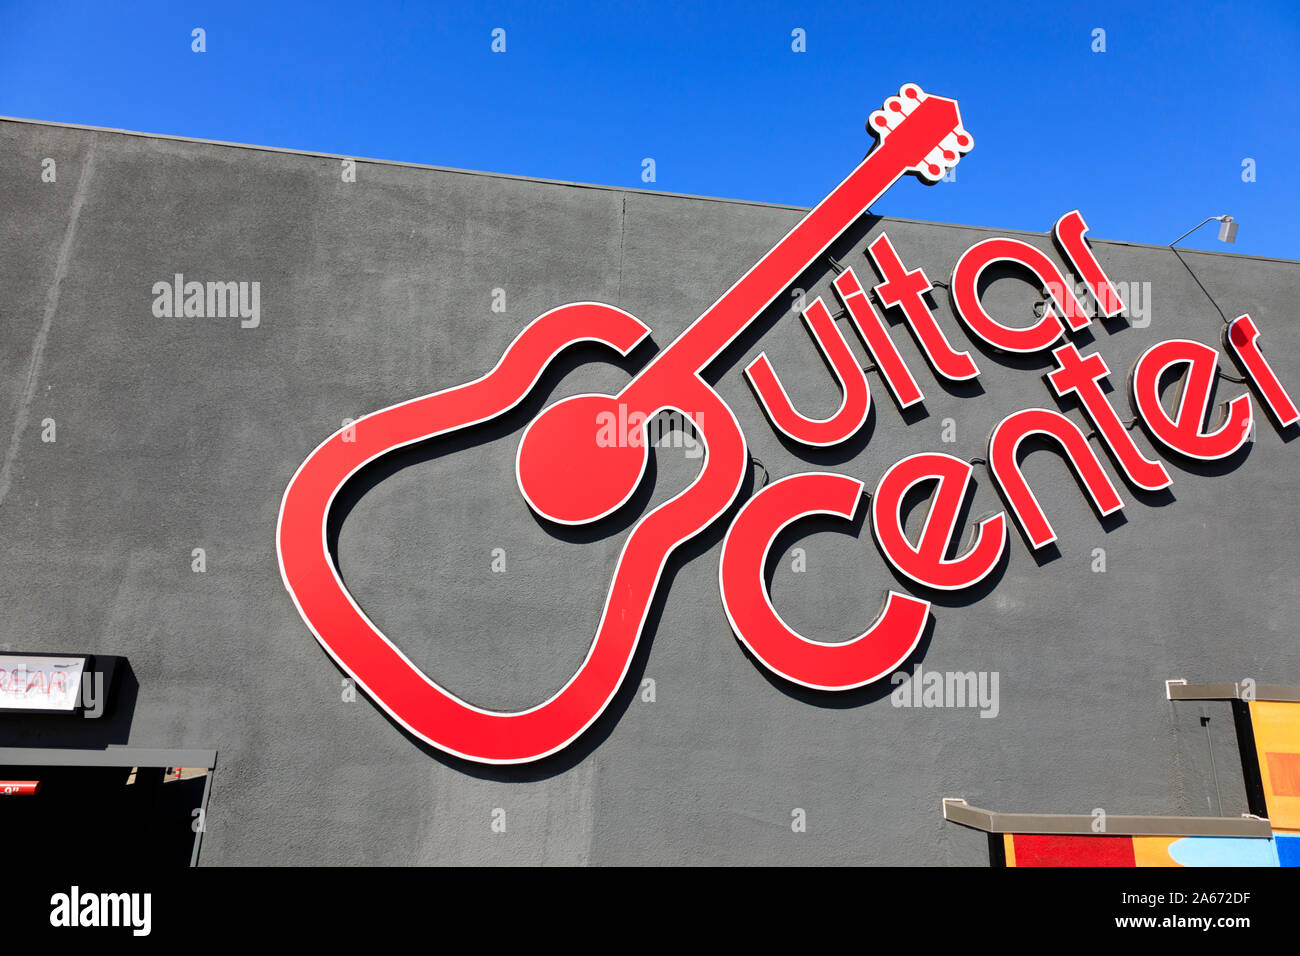 Guitar Center, musical instrument retailer, Hollywood, Los Angeles, California, United States of America. October 2019 Stock Photo